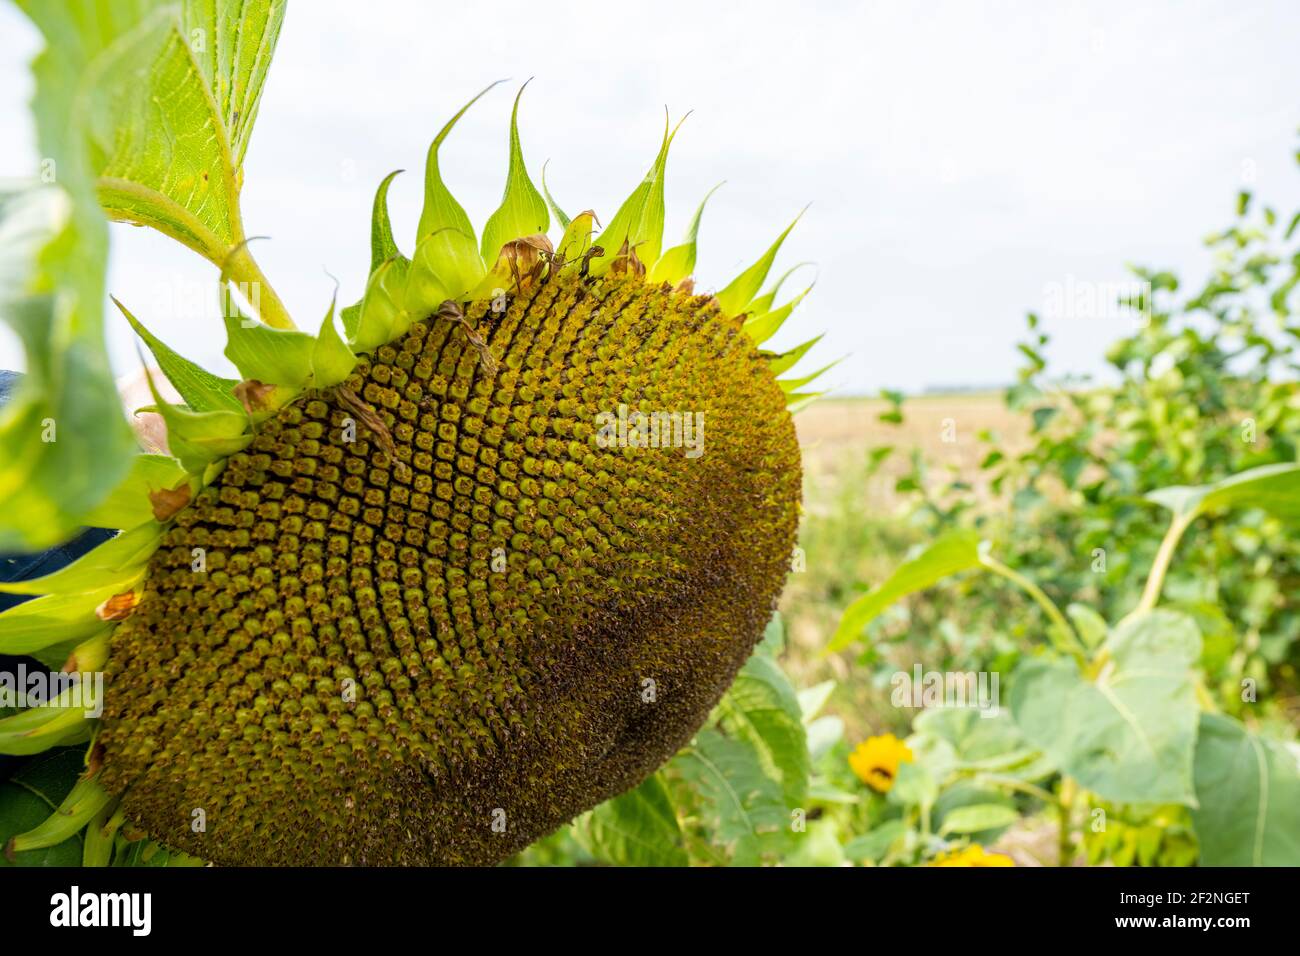 Adult sunflower in a garden Stock Photo - Alamy